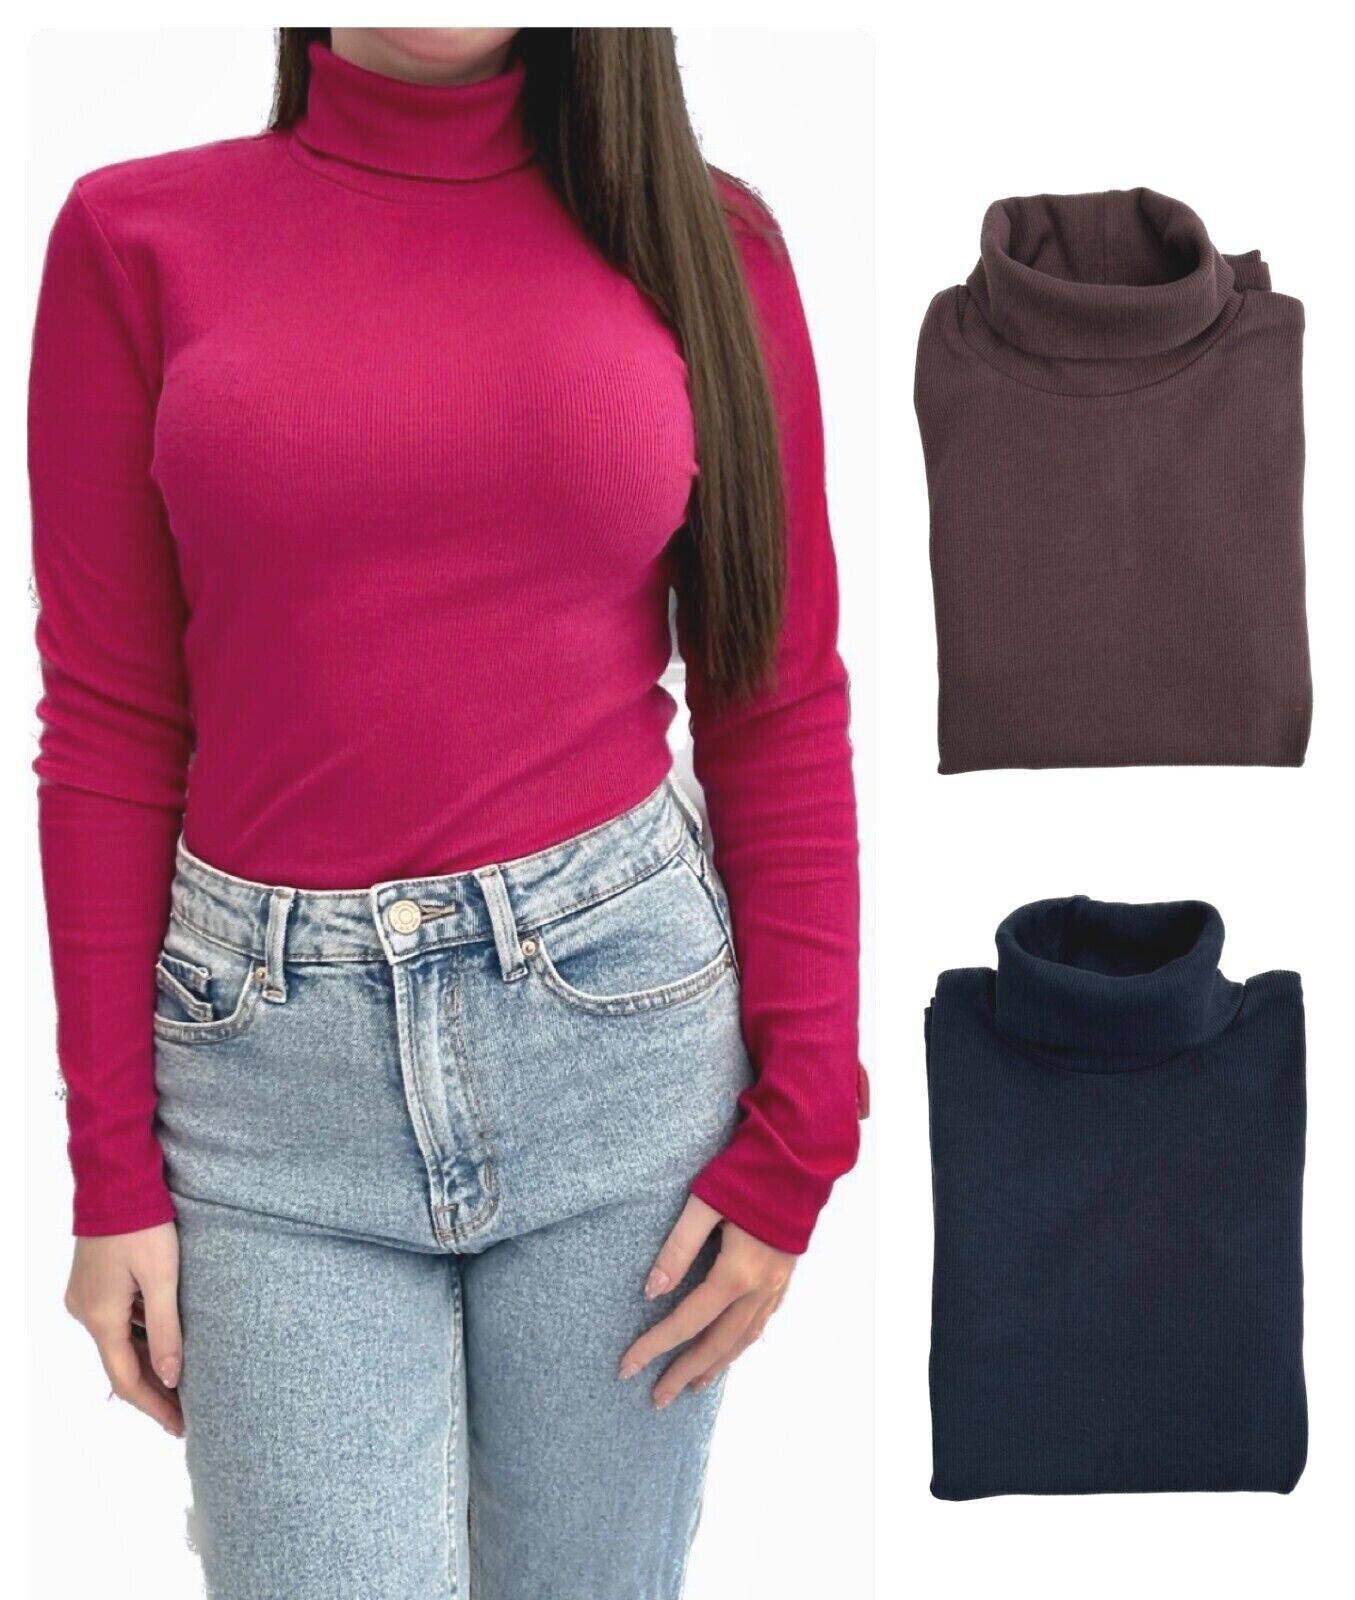 Ex Famous Store Brand Ladies Ribbed Roll Neck Top Cotton Rich Slim Pink Navy Brown Long Sleeved